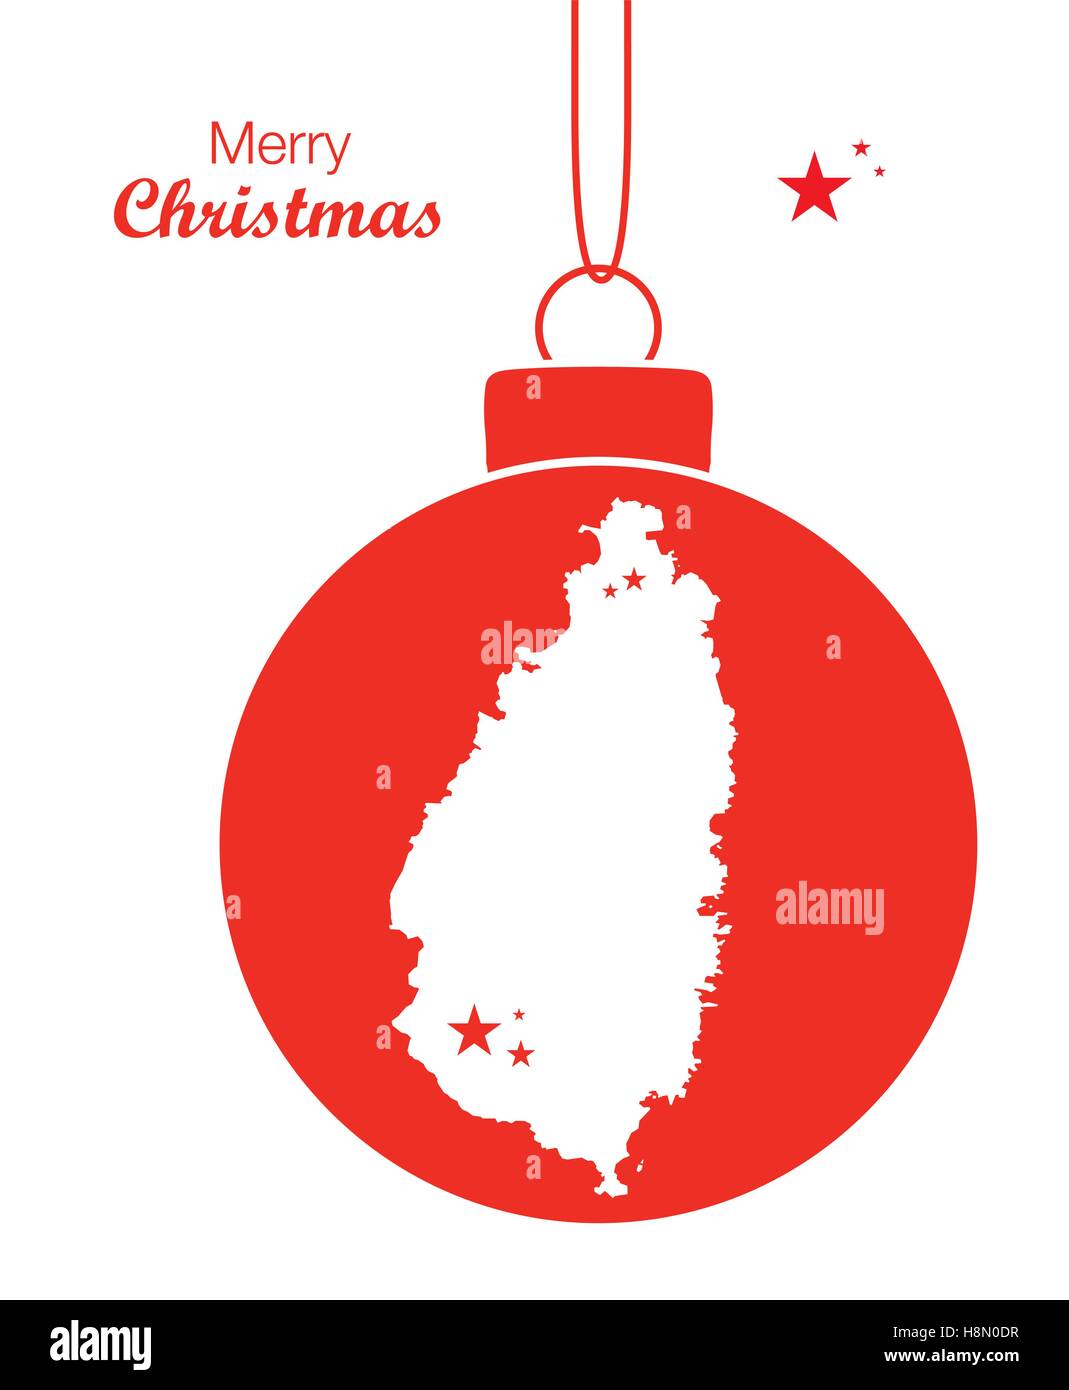 Merry Christmas Map St. Lucia Stock Vector